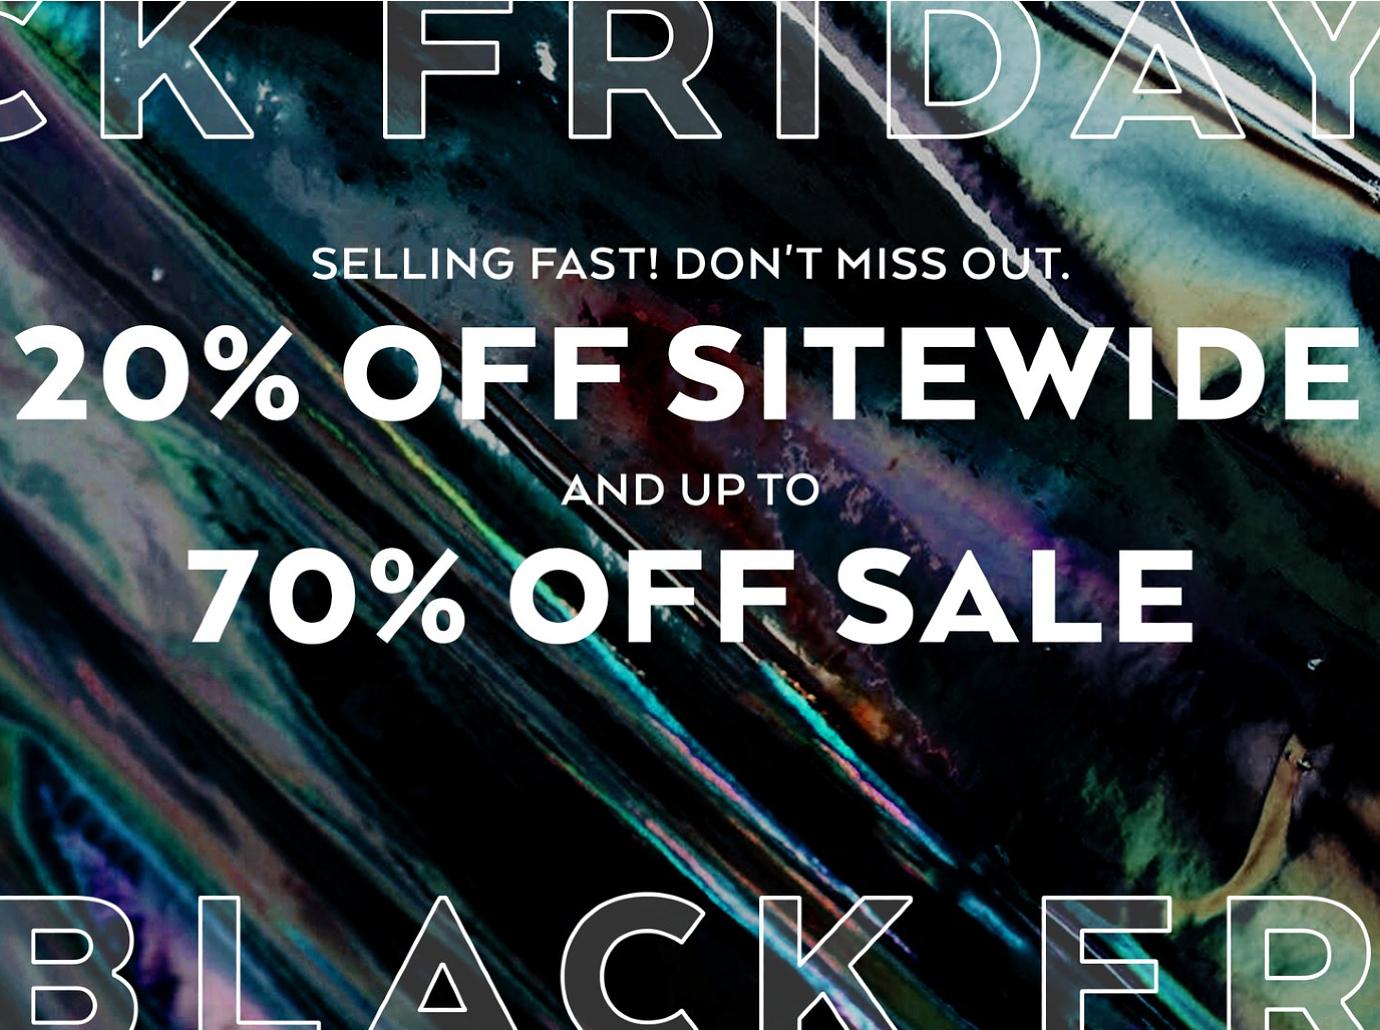 Get 30% Off Sitewide During Alo Yoga's Early Black Friday Sale